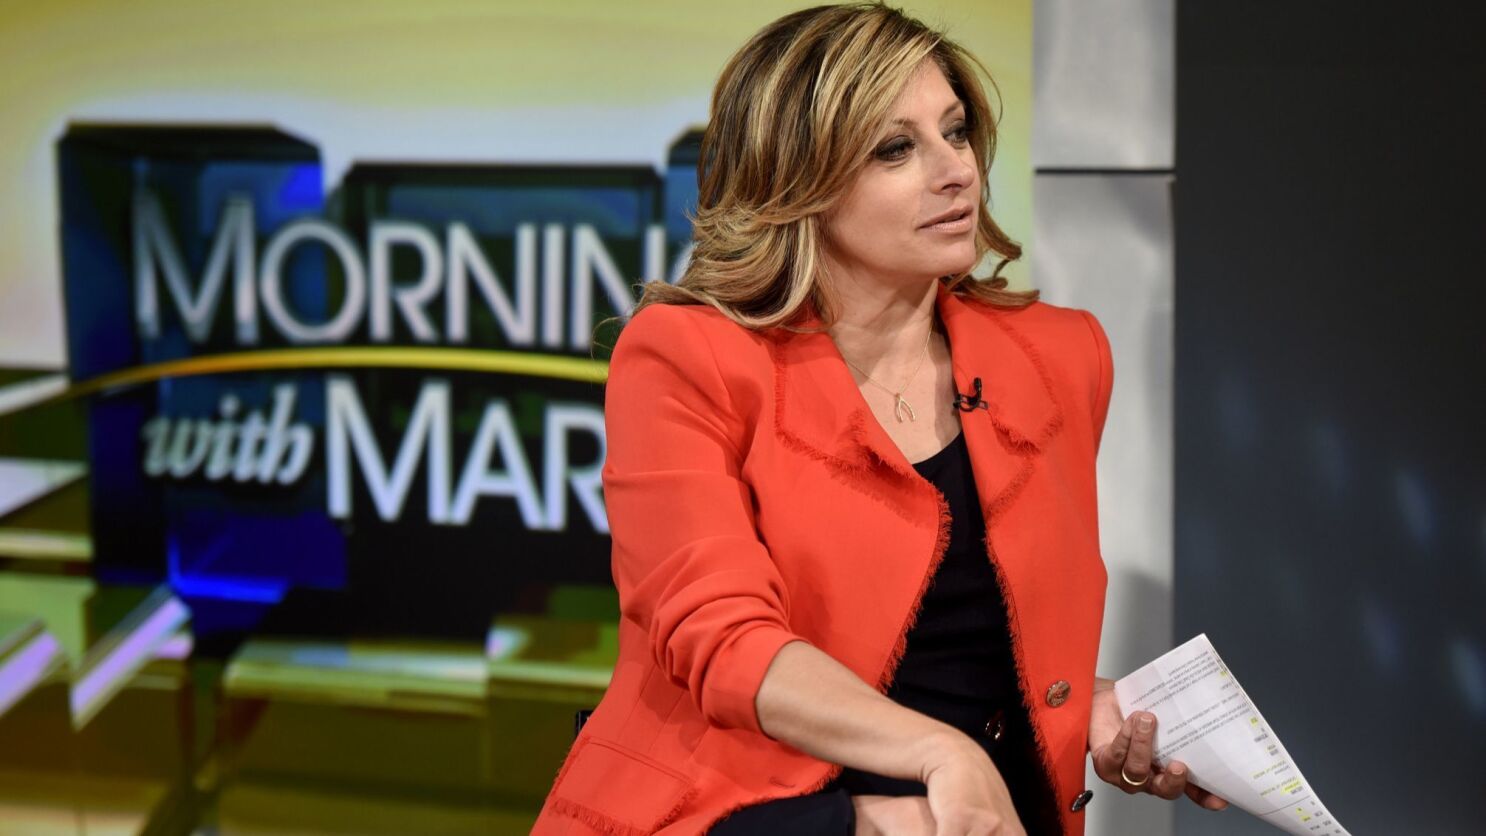 How I Made It Maria Bartiromo S Stock Has Risen At Fox Business Network And Fox News Los Angeles Times